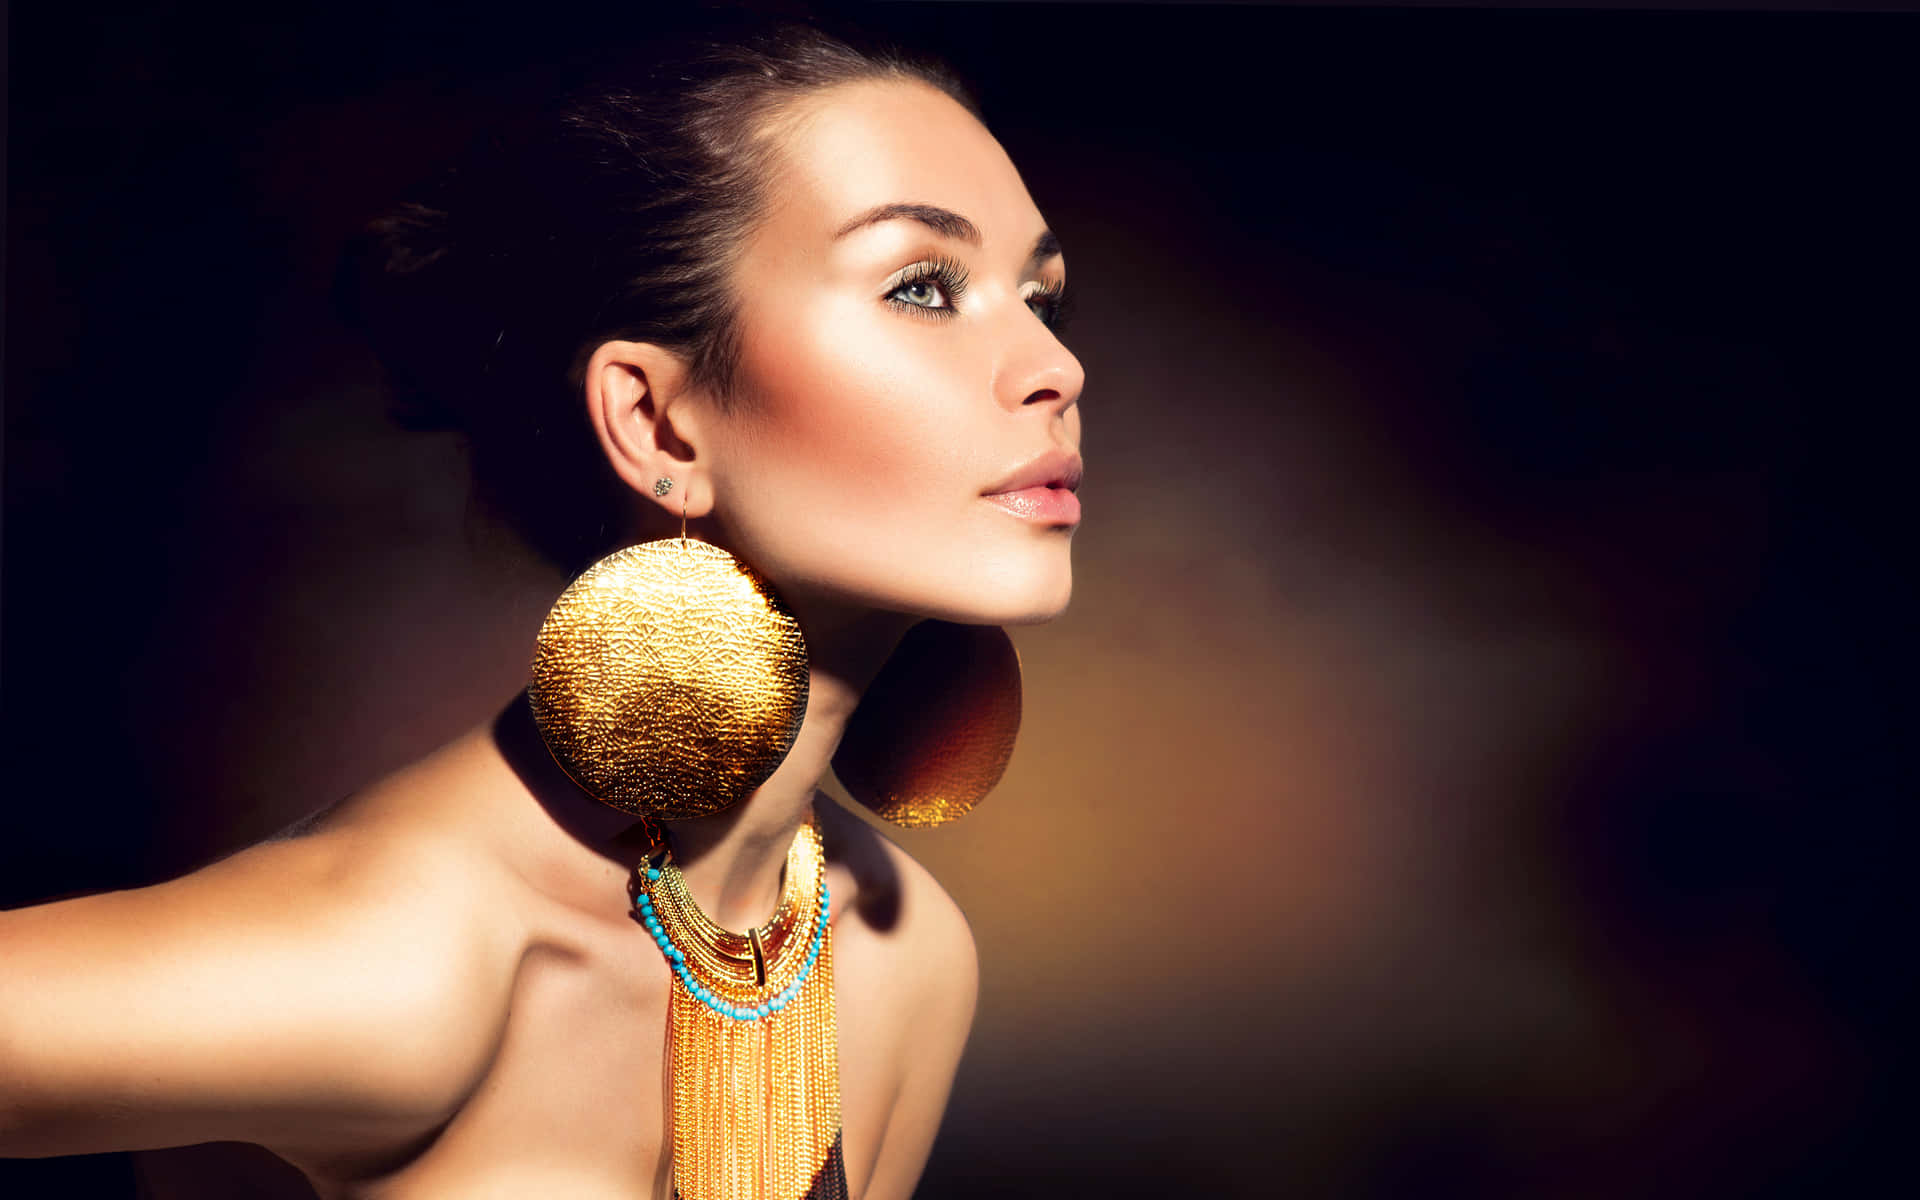 a woman wearing gold earrings and a necklace